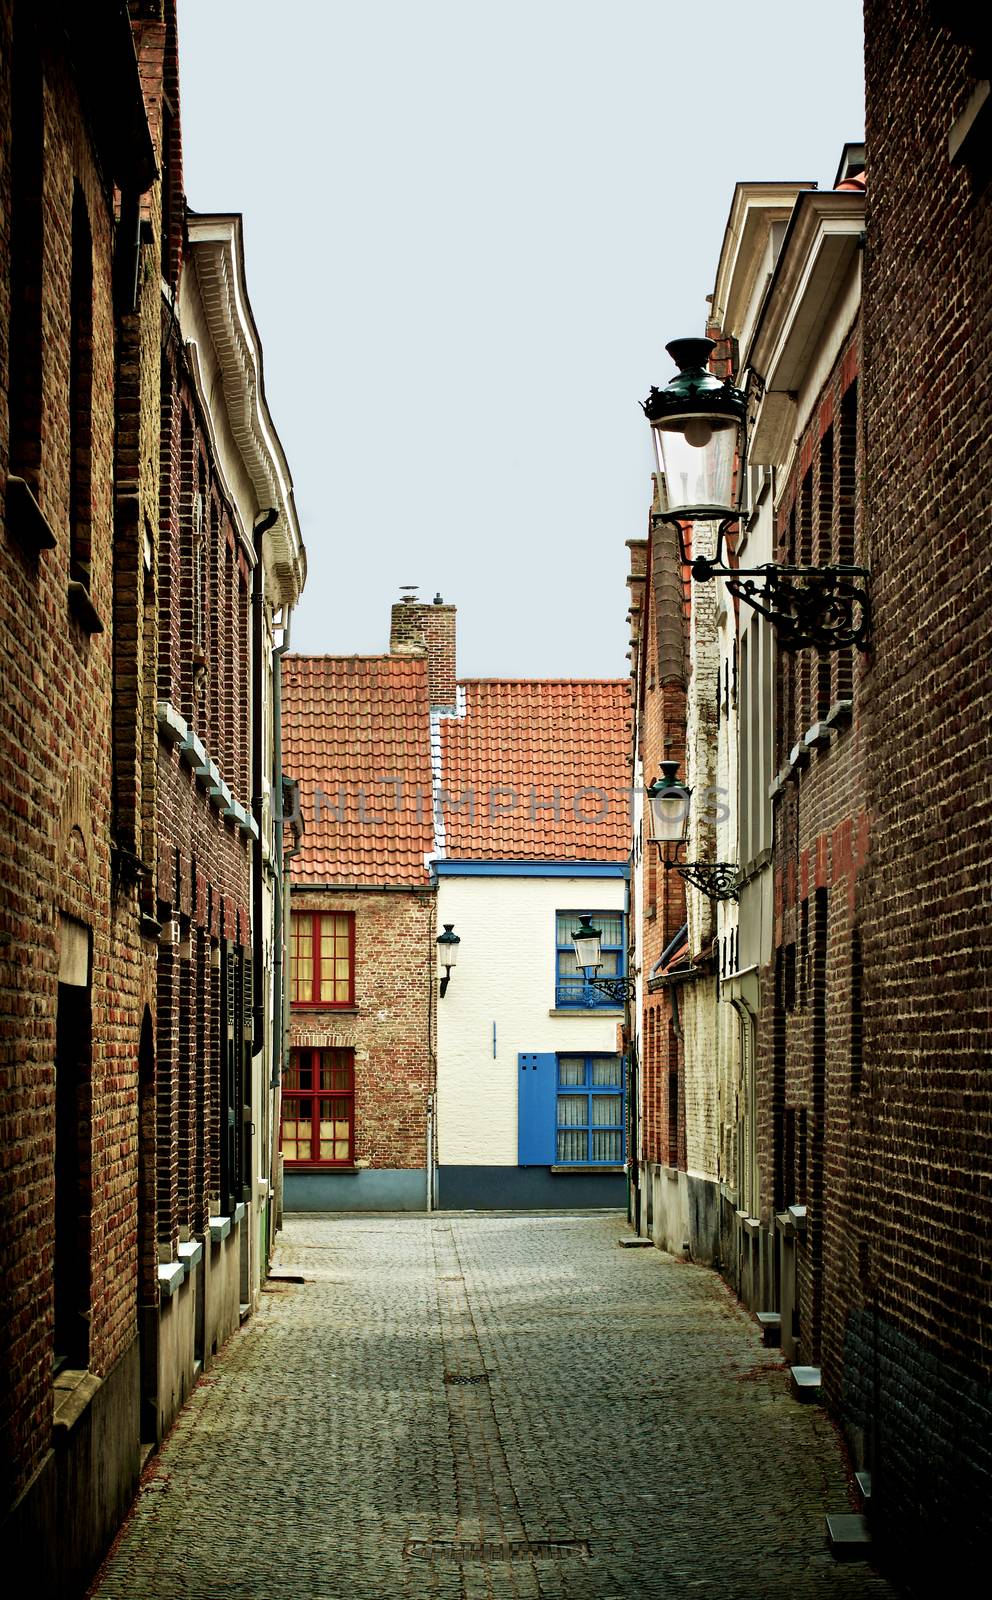 Obsolete Narrow Street with Multi Colored Old Houses and Street Lantern in Cloudy Day Outdoors. Bruges, Belgium